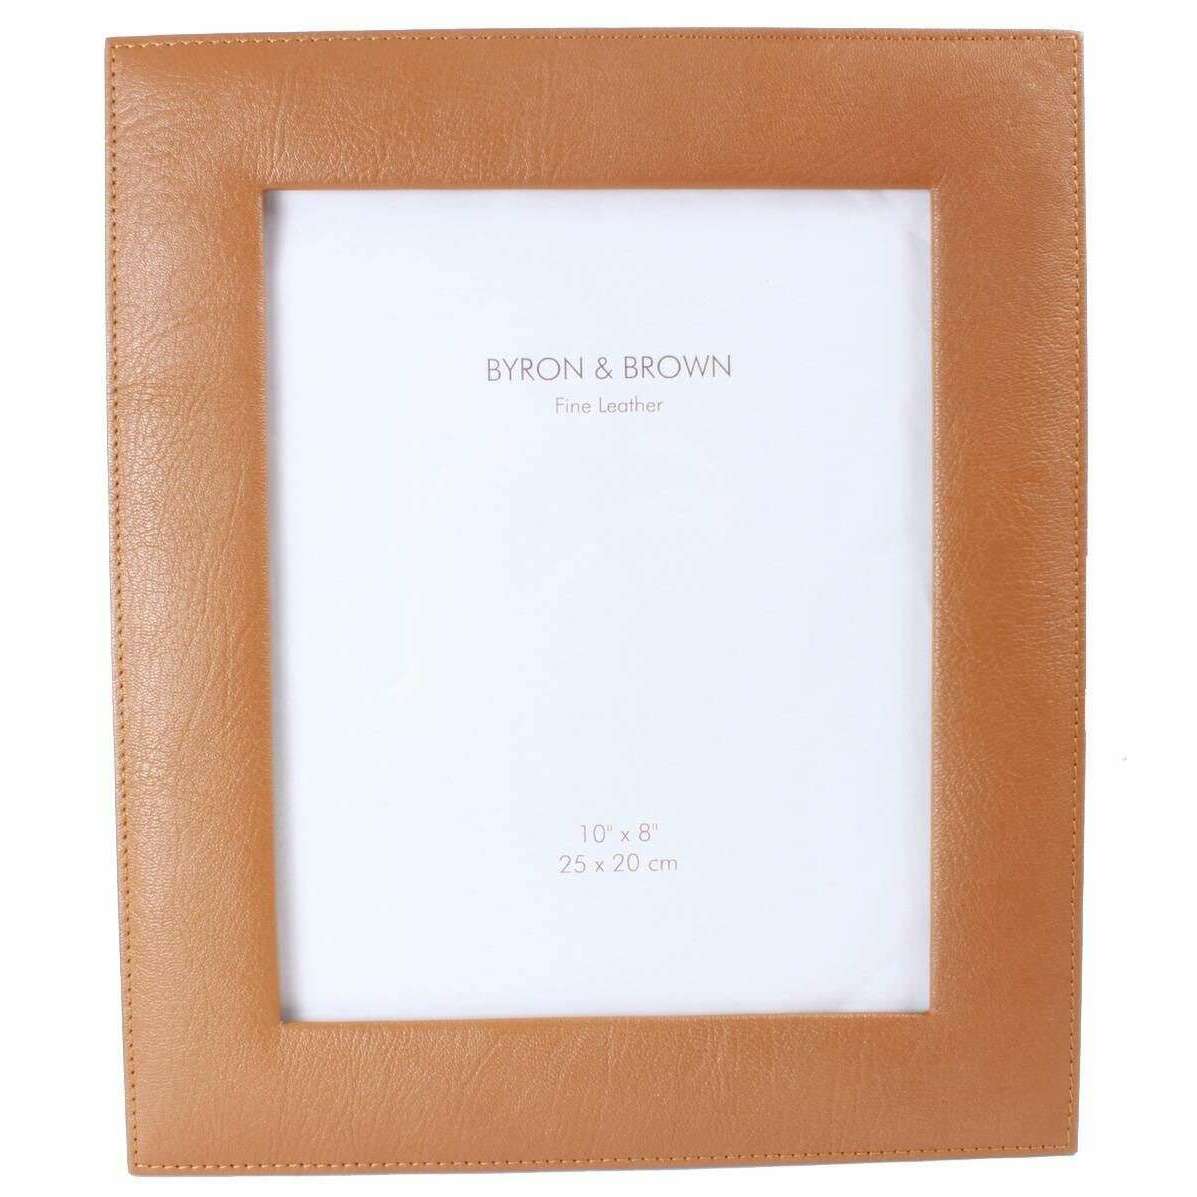 Byron and Brown Vintage Leather Photo Frame 10x8 - Tan